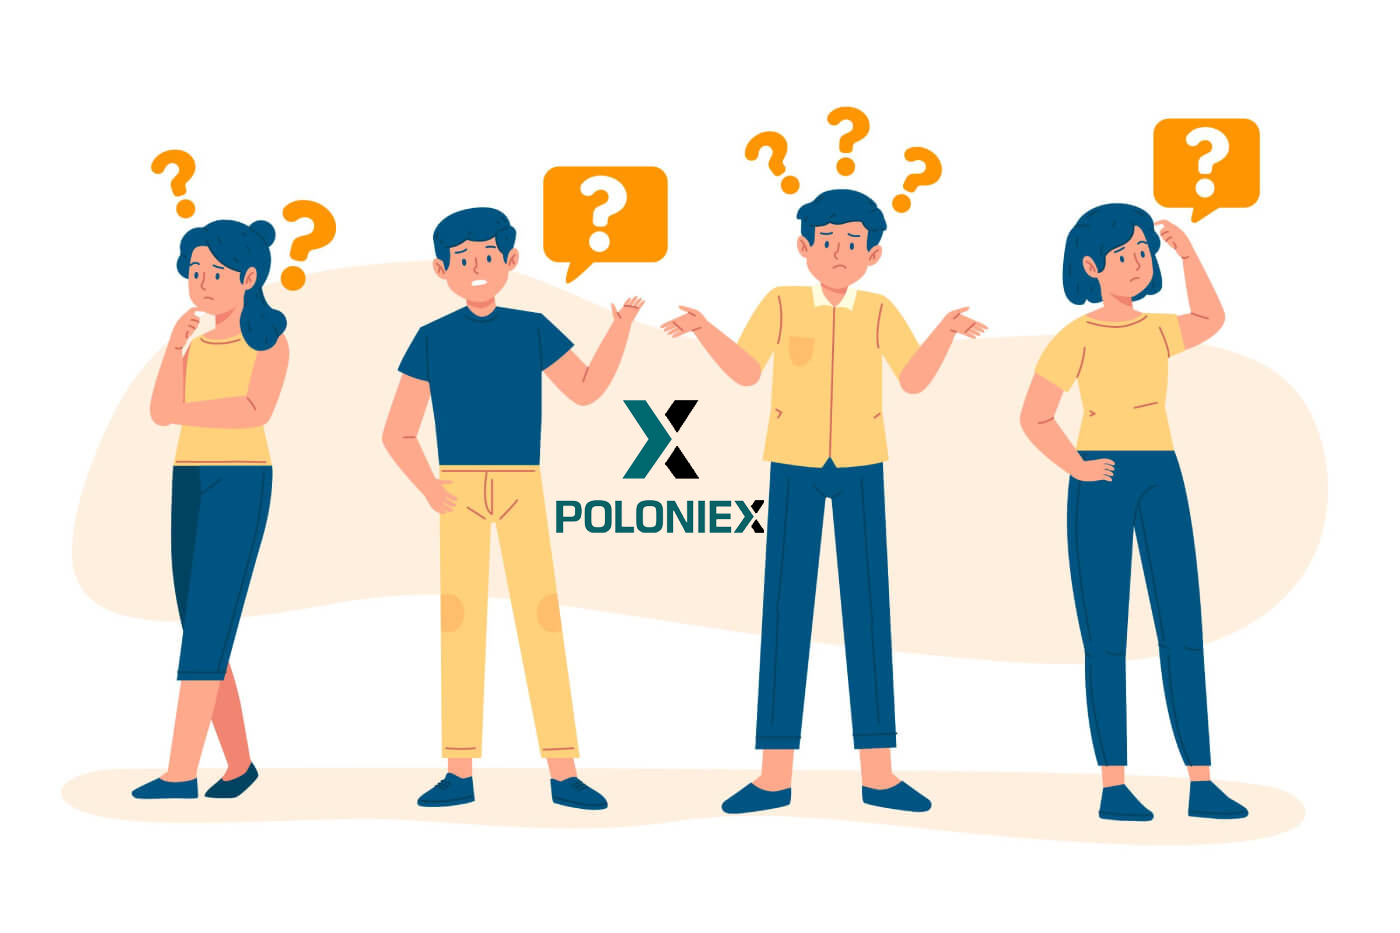 Frequently Asked Questions (FAQ) in Poloniex